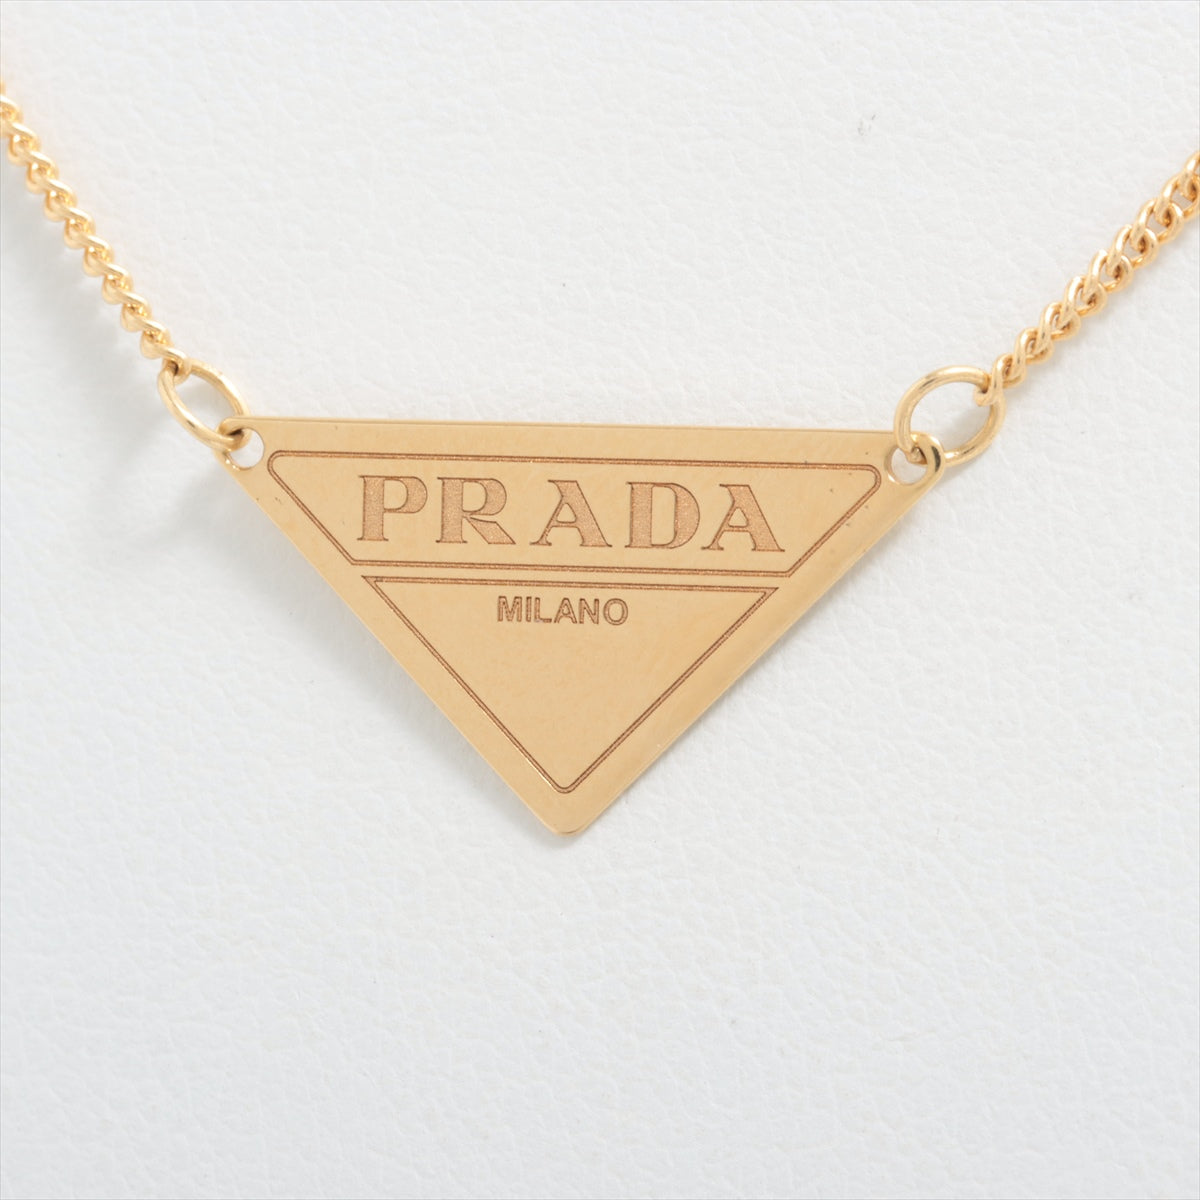 Prada Triangle Necklace - Buy the best products with free shipping on  AliExpress